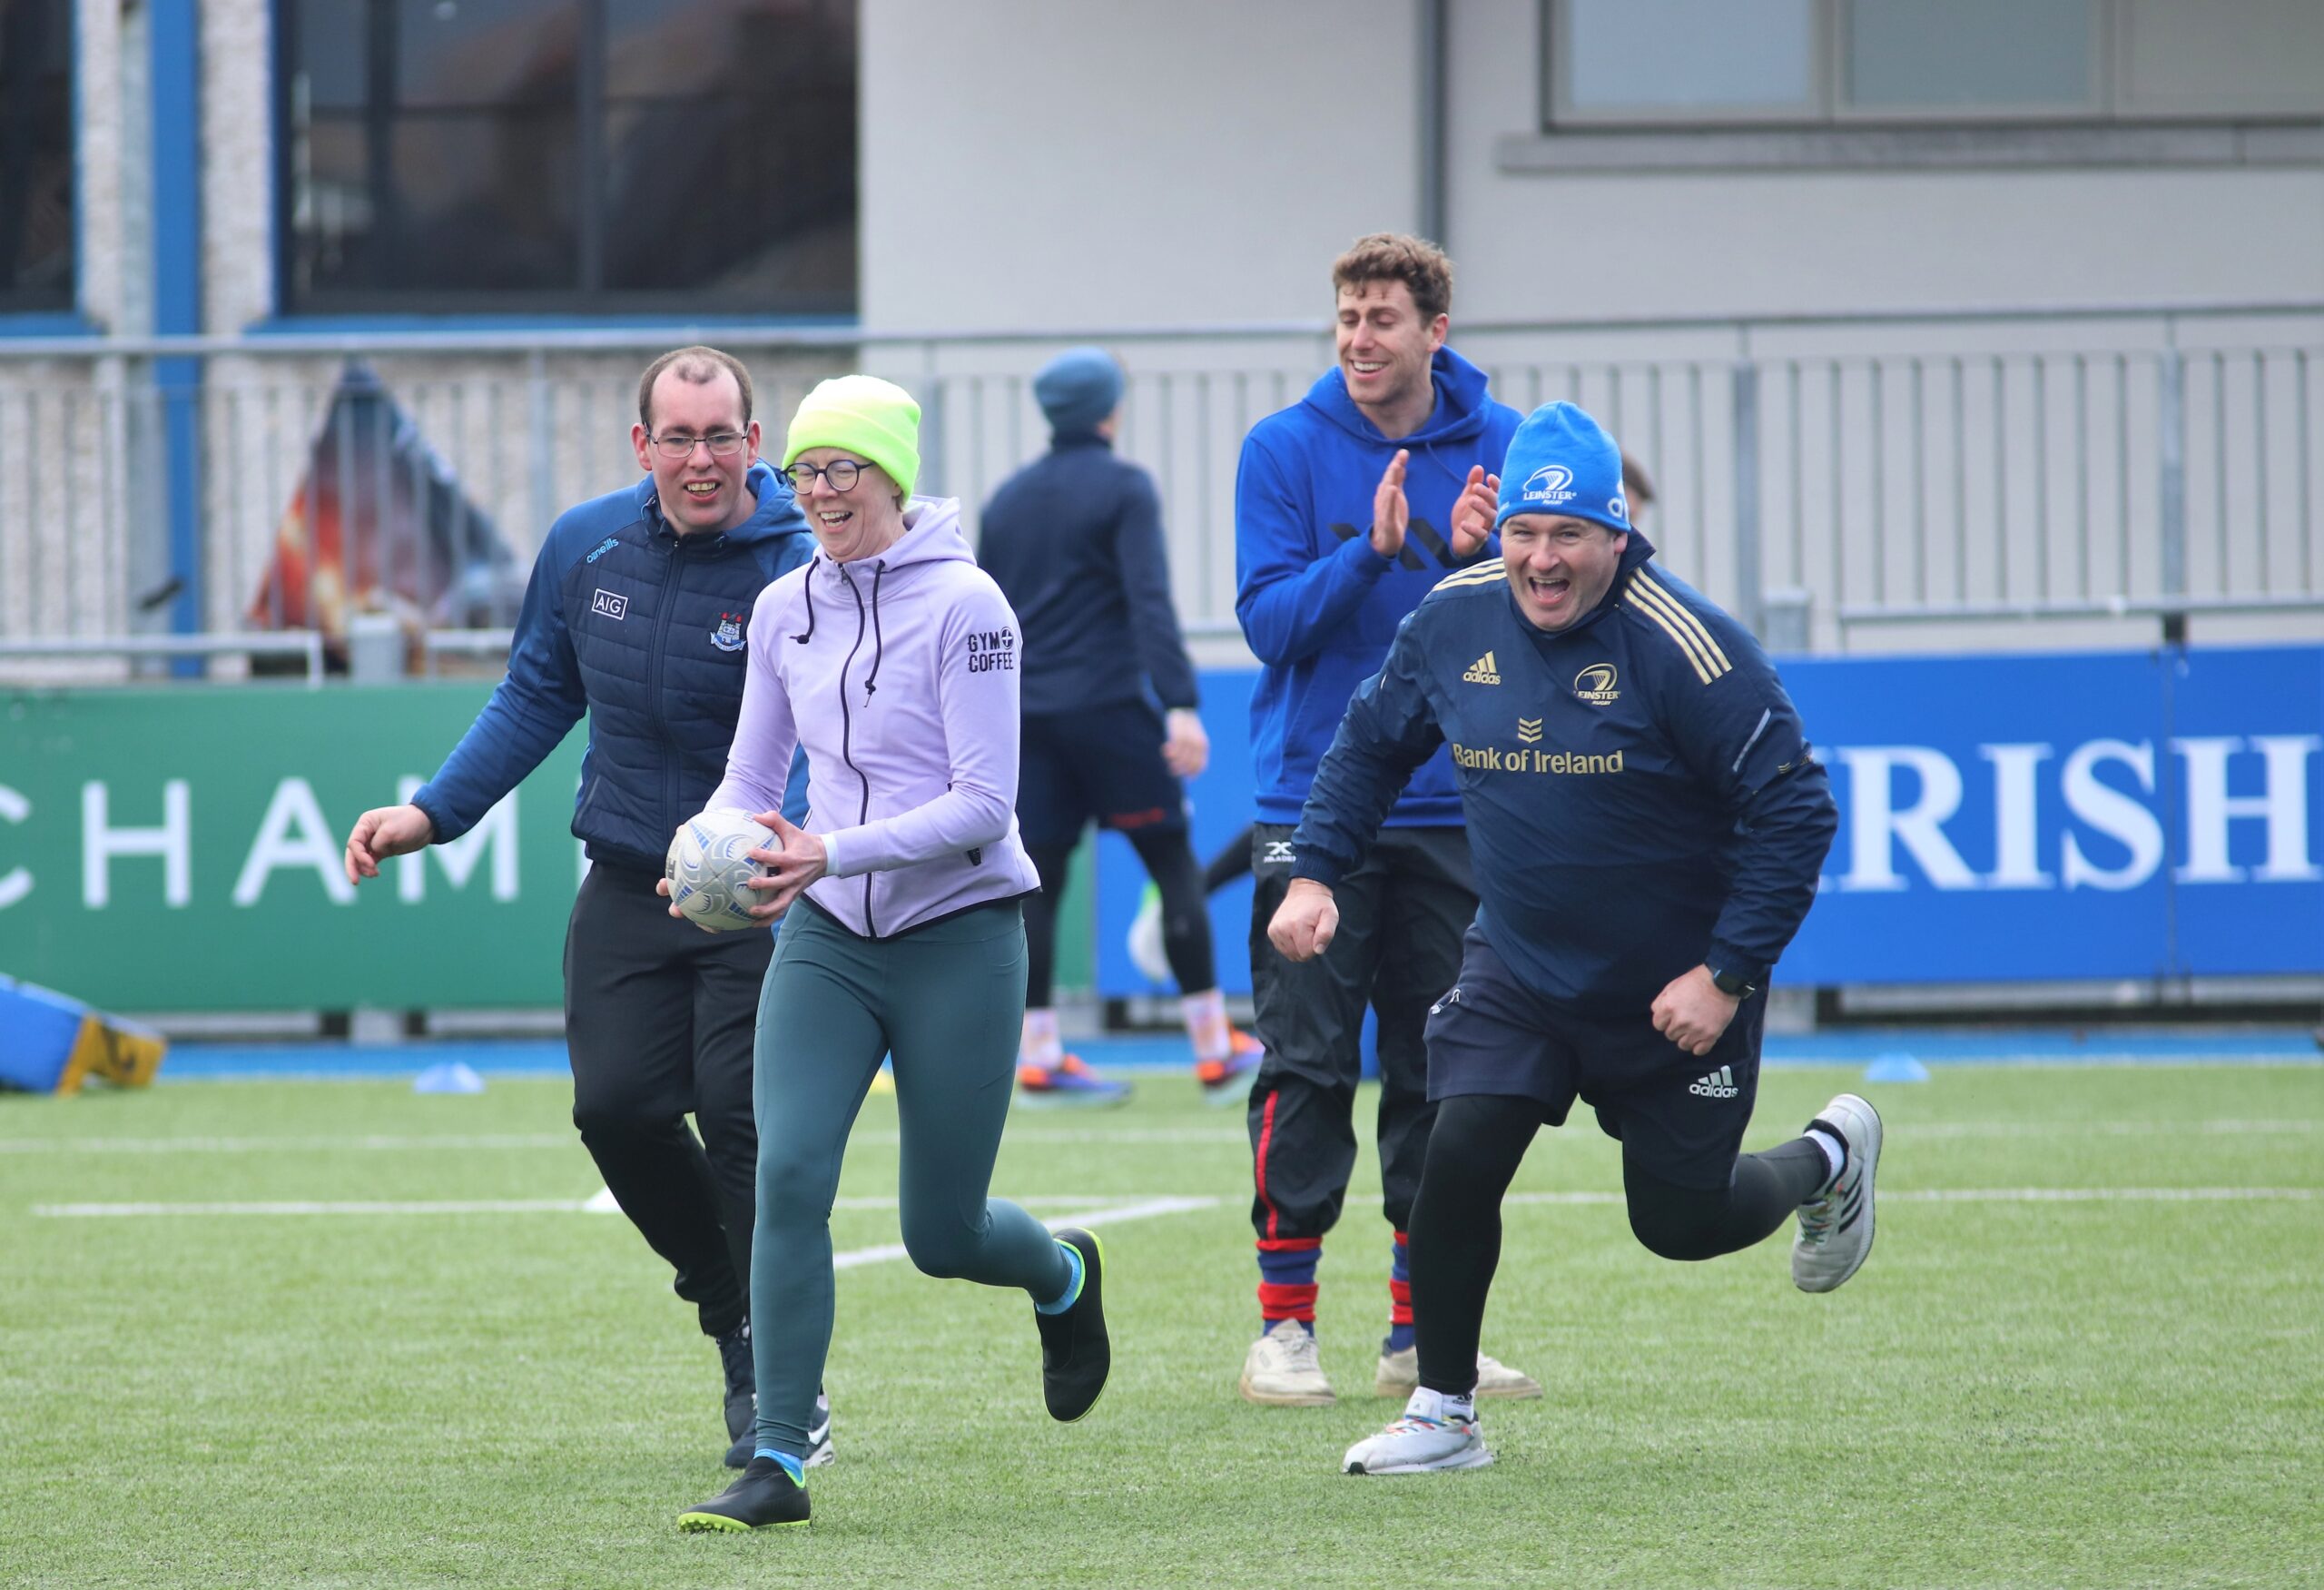 Photo of participants and coaches playing rugby.